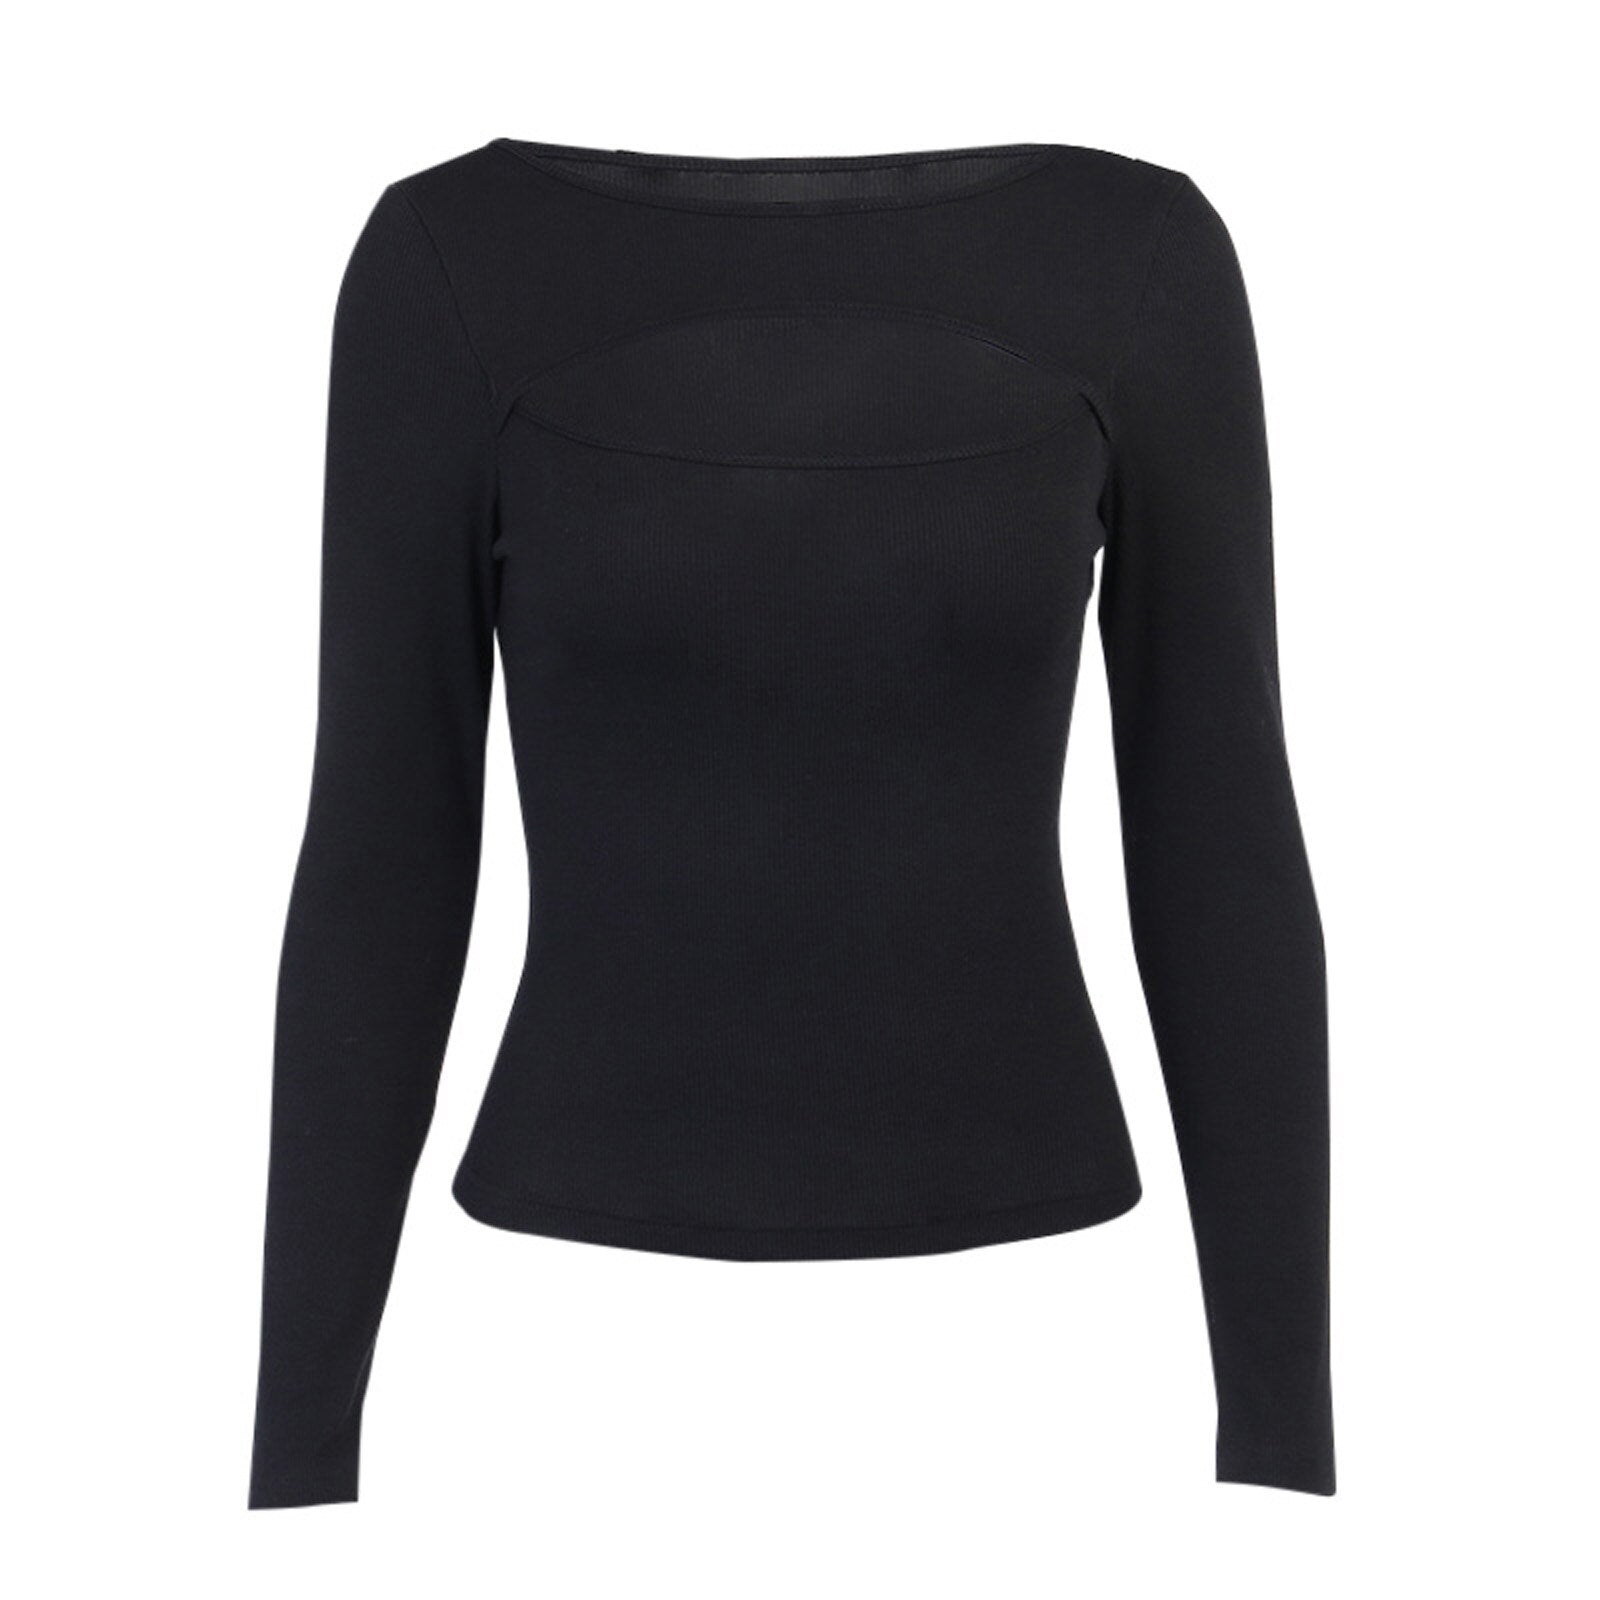 Cinessd  2022 Autumn Fashion Women Sexy Hollow Out Slim Fit Long Sleeve Casual Round Neck Shirt Solid Black Tops T Shirt 5 Colors